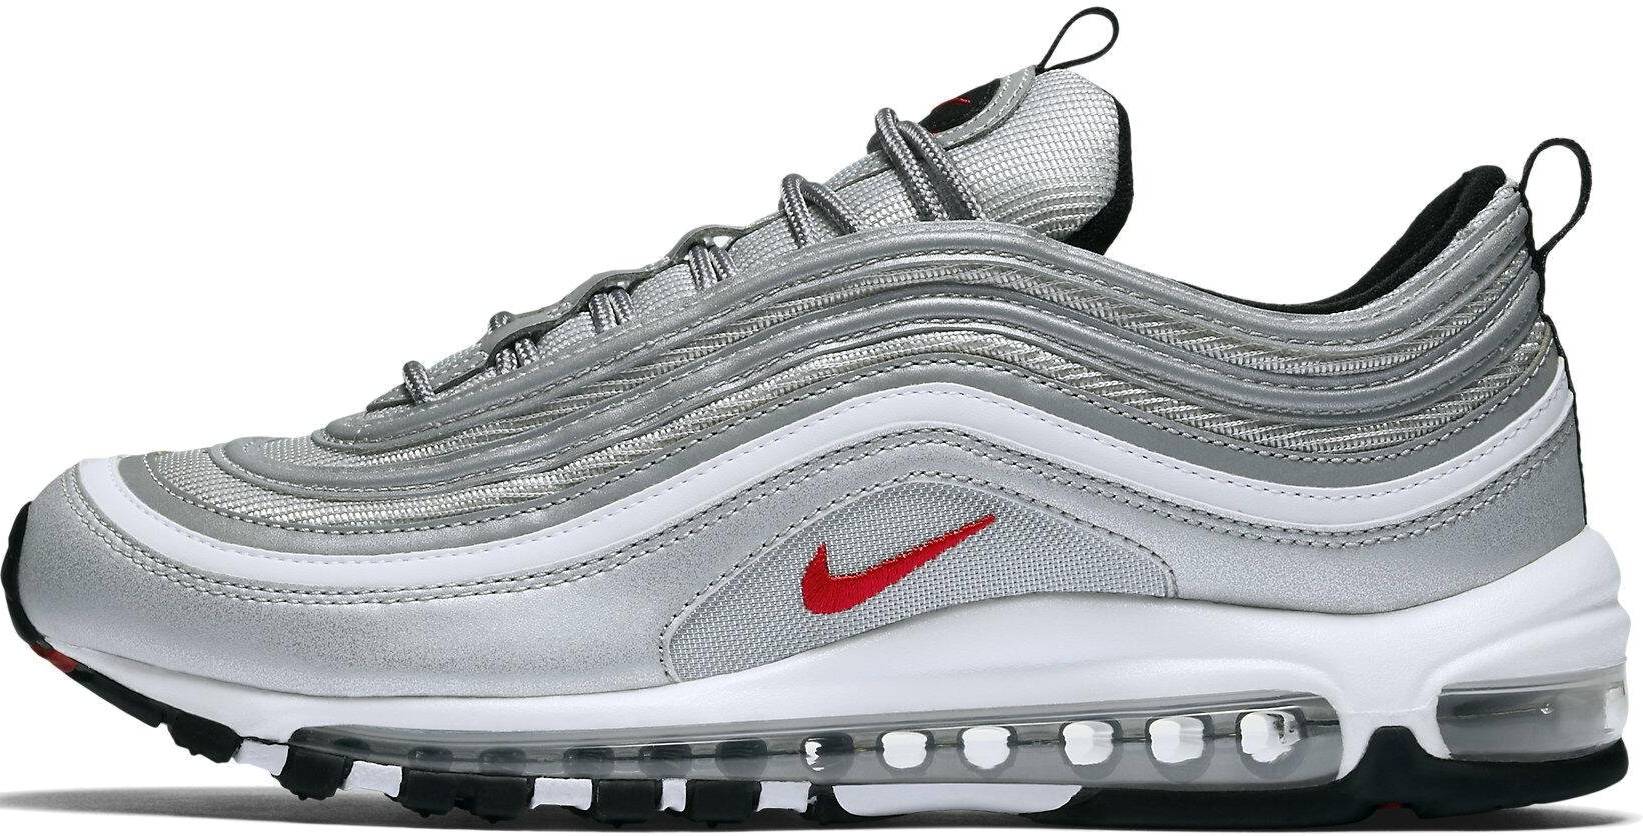 Save 19% on Nike Air Max 97 Sneakers 